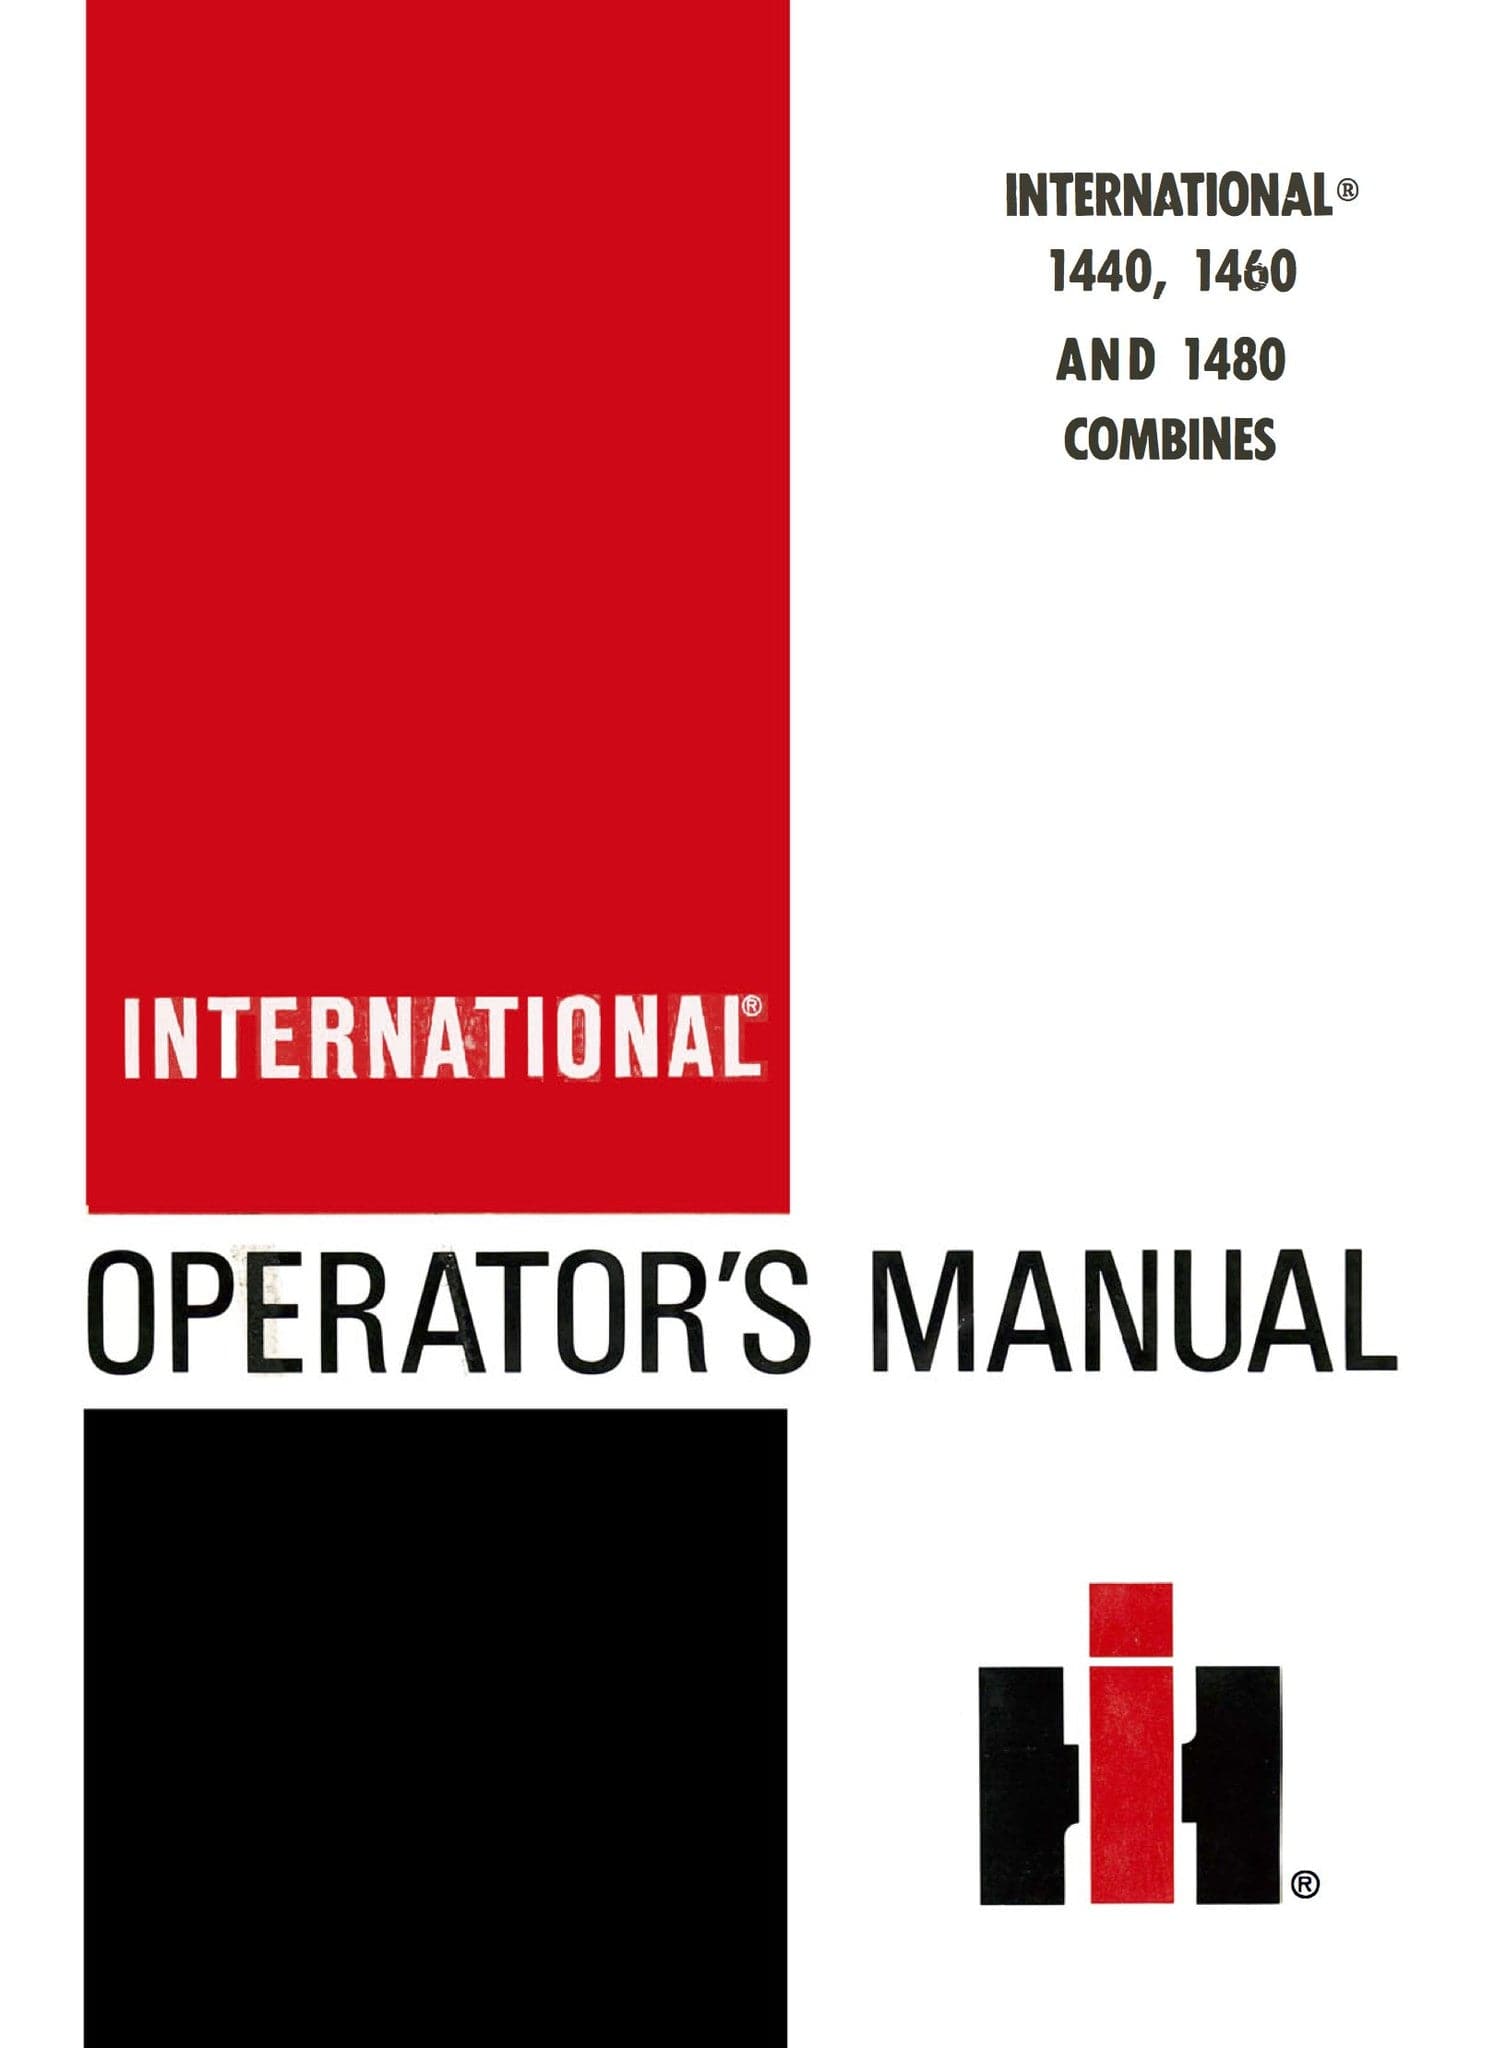 INTERNATIONAL 1440, 1460 AND 1480 COMBINES - Operator's Manual - Ag Manuals 